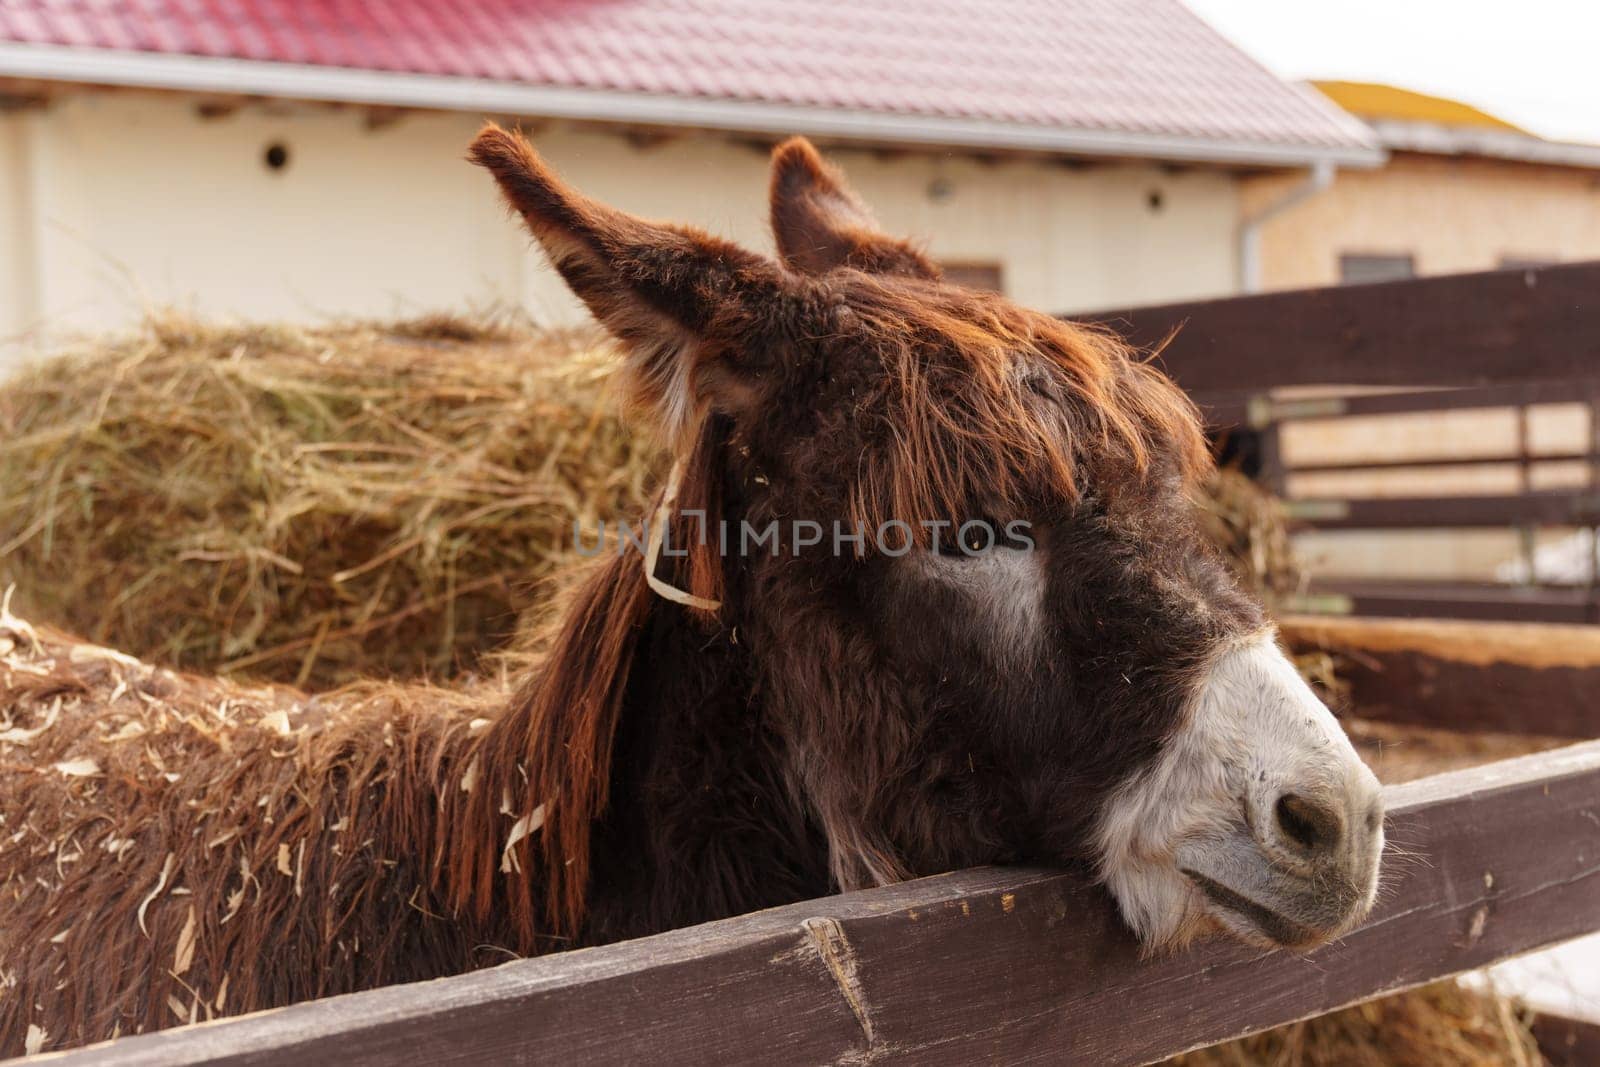 Donkey on a farm curiously sticking its head over a wooden fence, observing its surroundings. by darksoul72